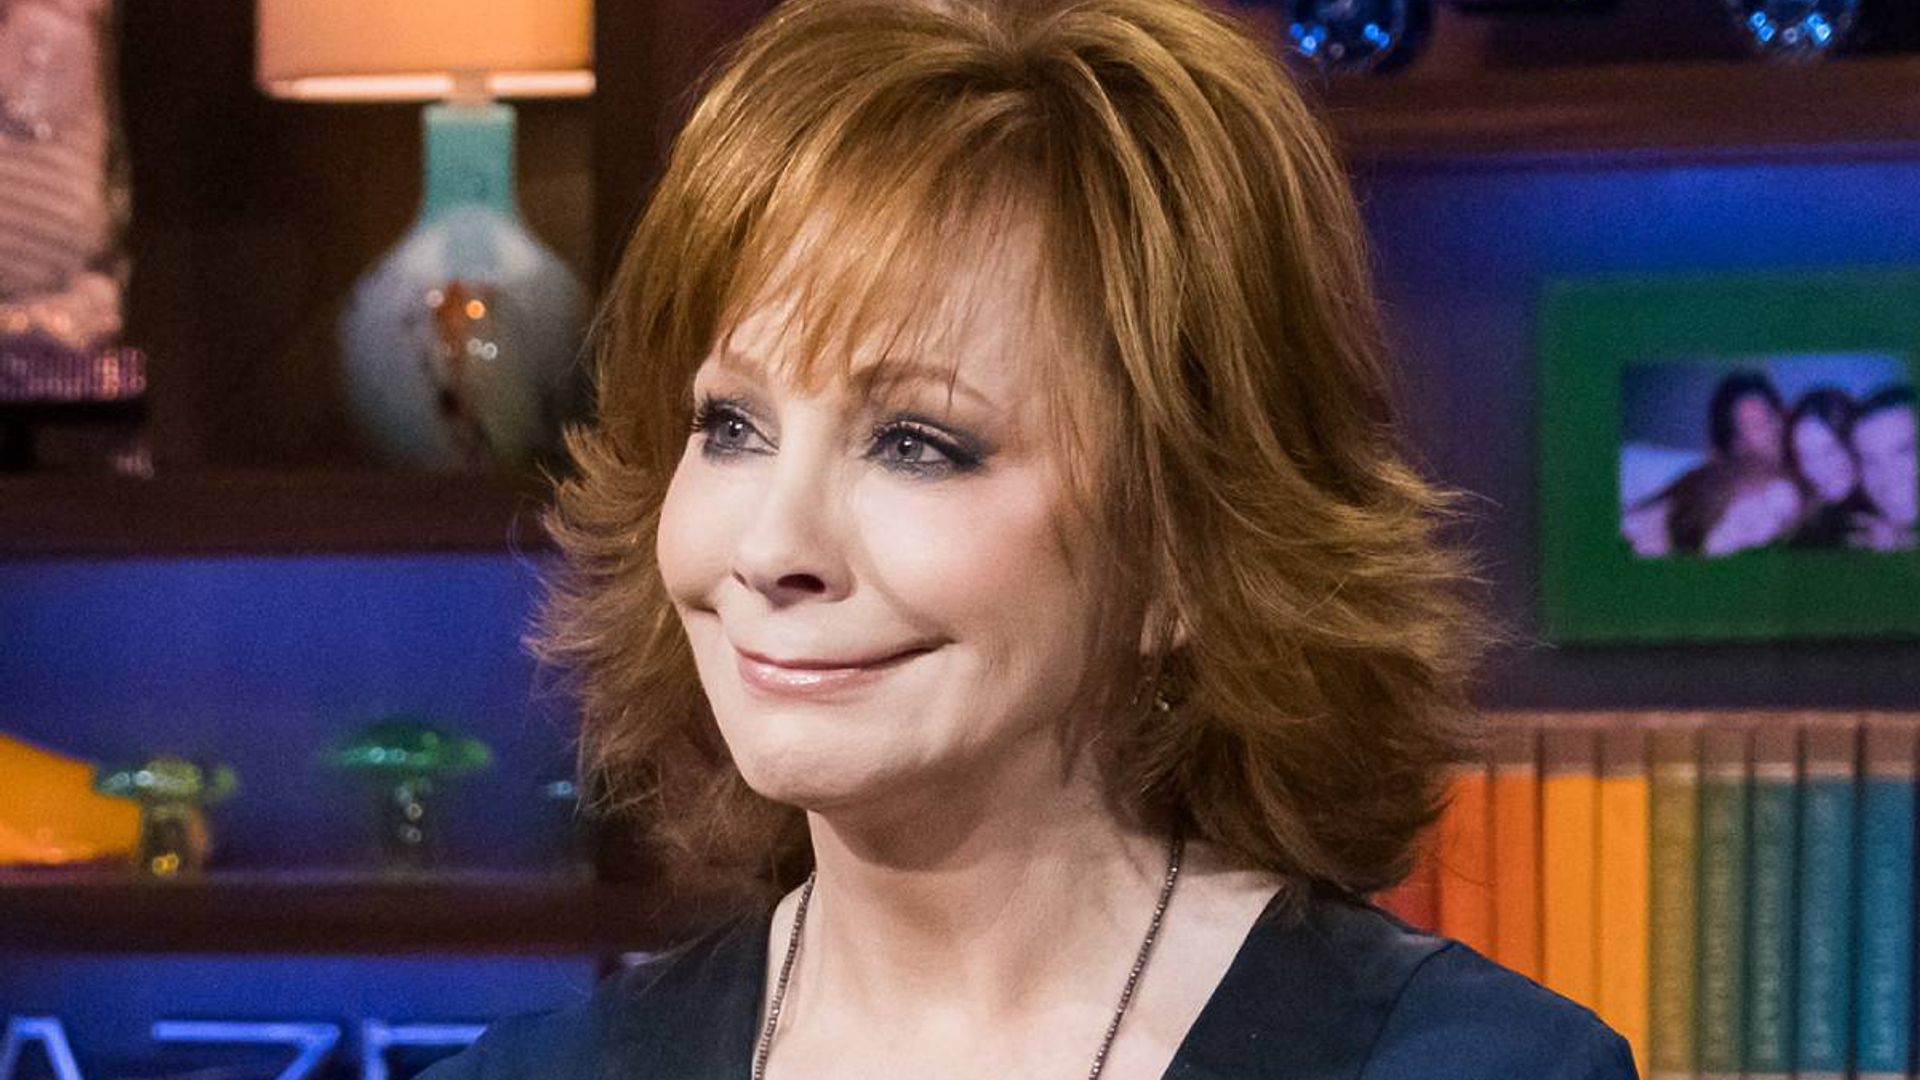 Reba McEntire pays emotional tribute to late mother alongside previously-unseen family photos